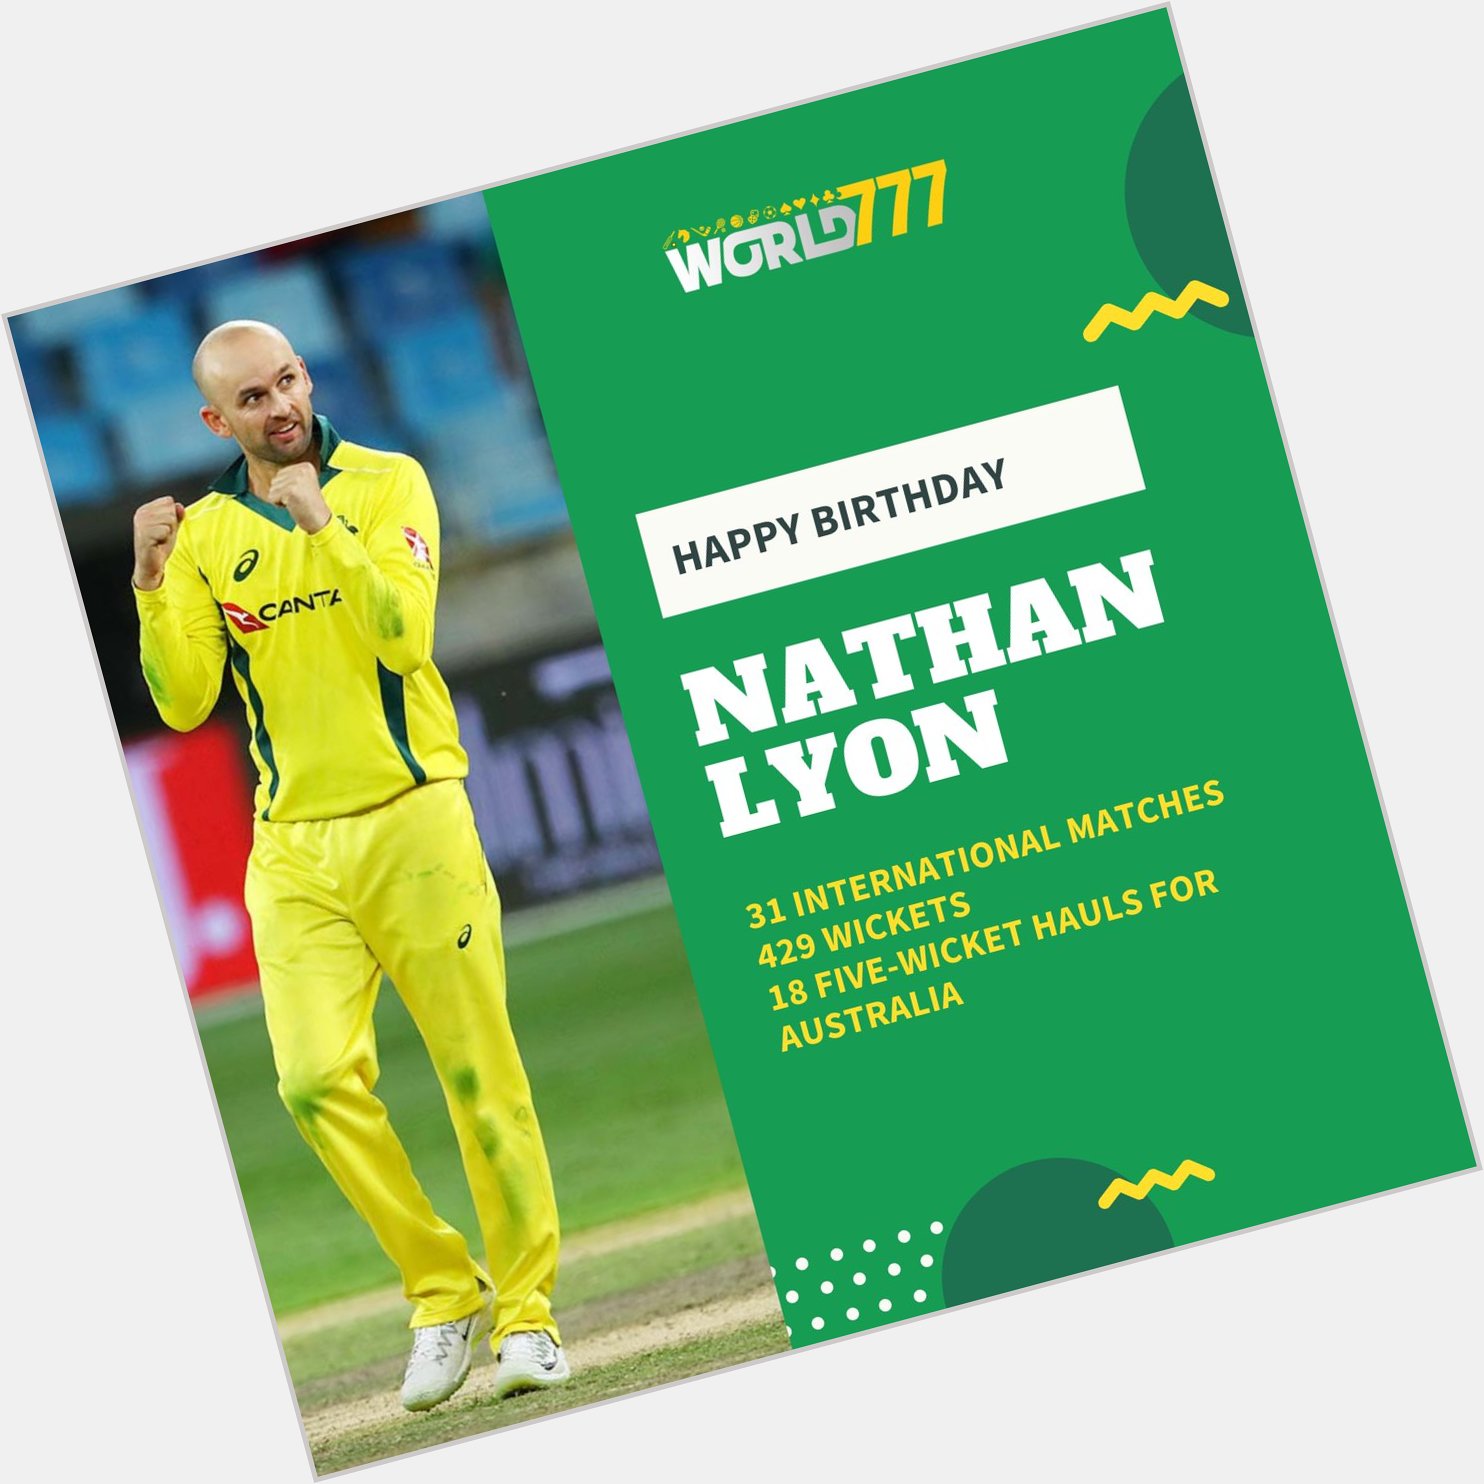 International matches 131
Wickets 429
18 five-wicket hauls

Wish You a Very Happy Birthday Nathan Lyon 